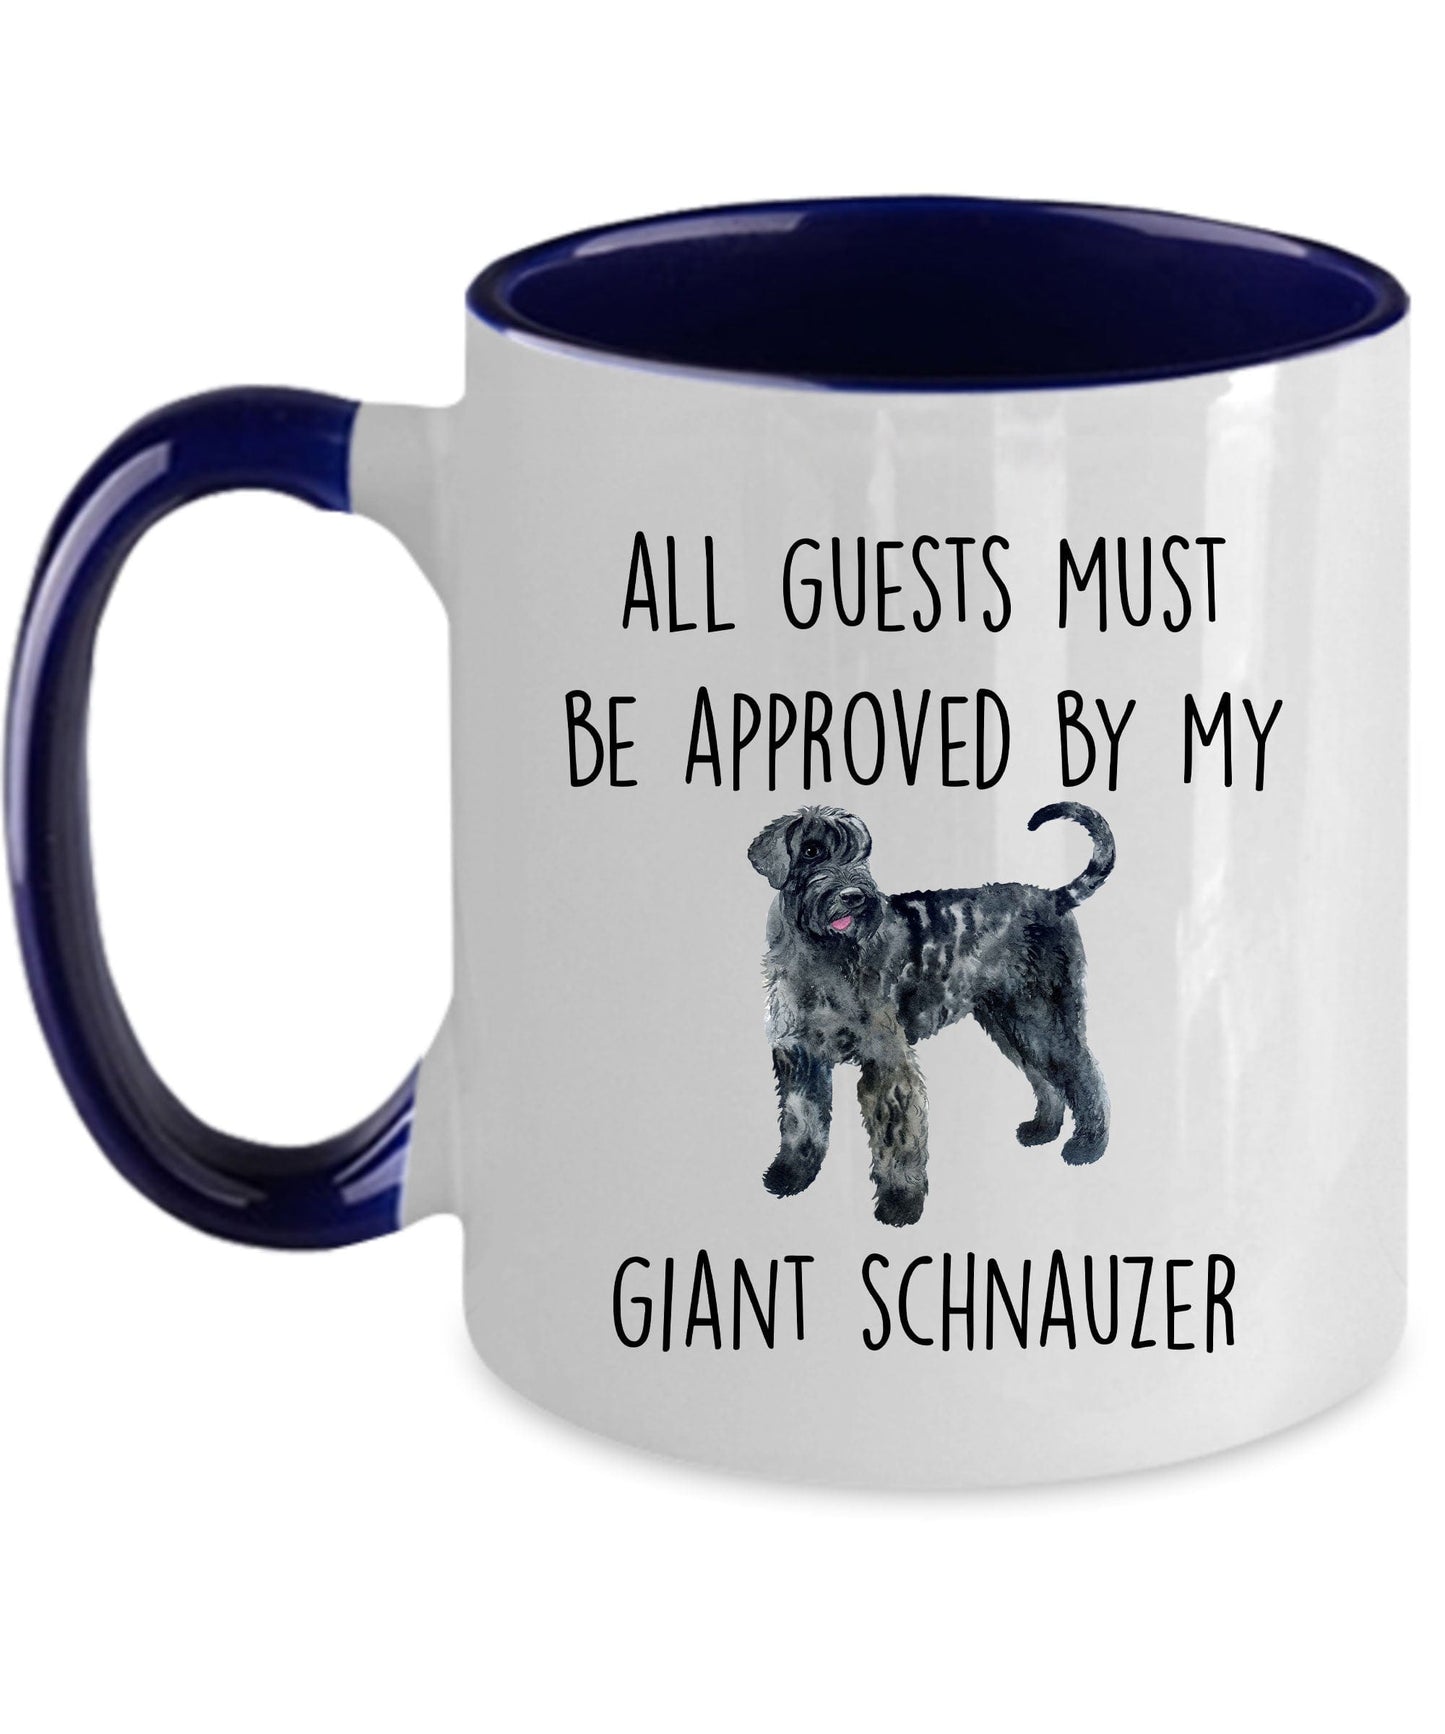 Giant Schnauzer funny dog lover coffee mug - All guests must be approved by my Giant Schnauzer